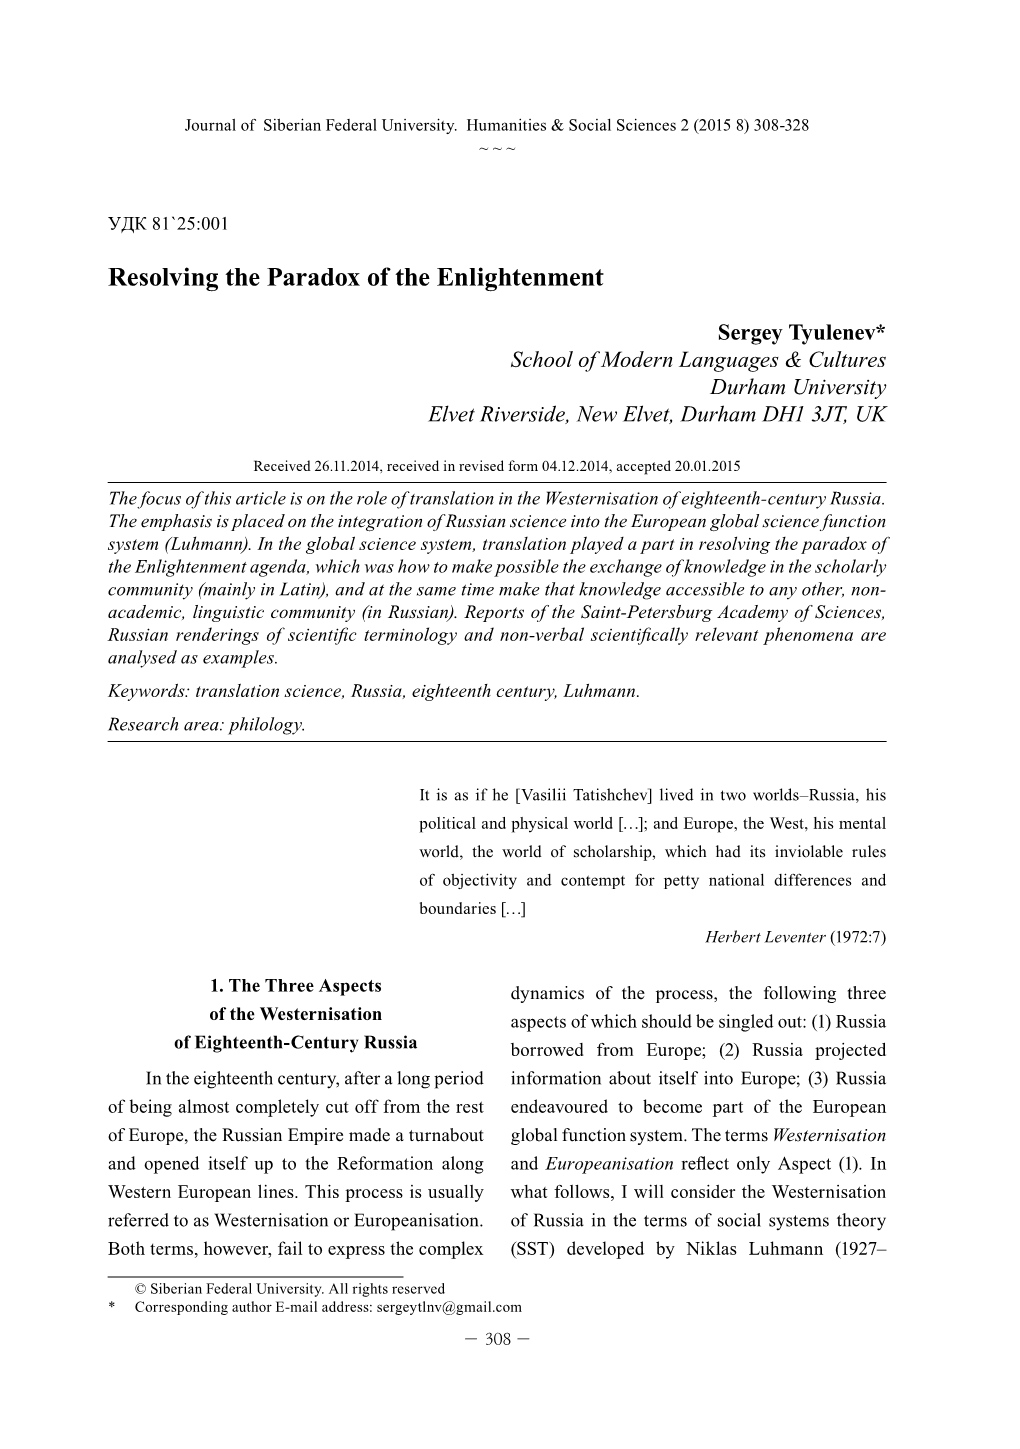 Resolving the Paradox of the Enlightenment